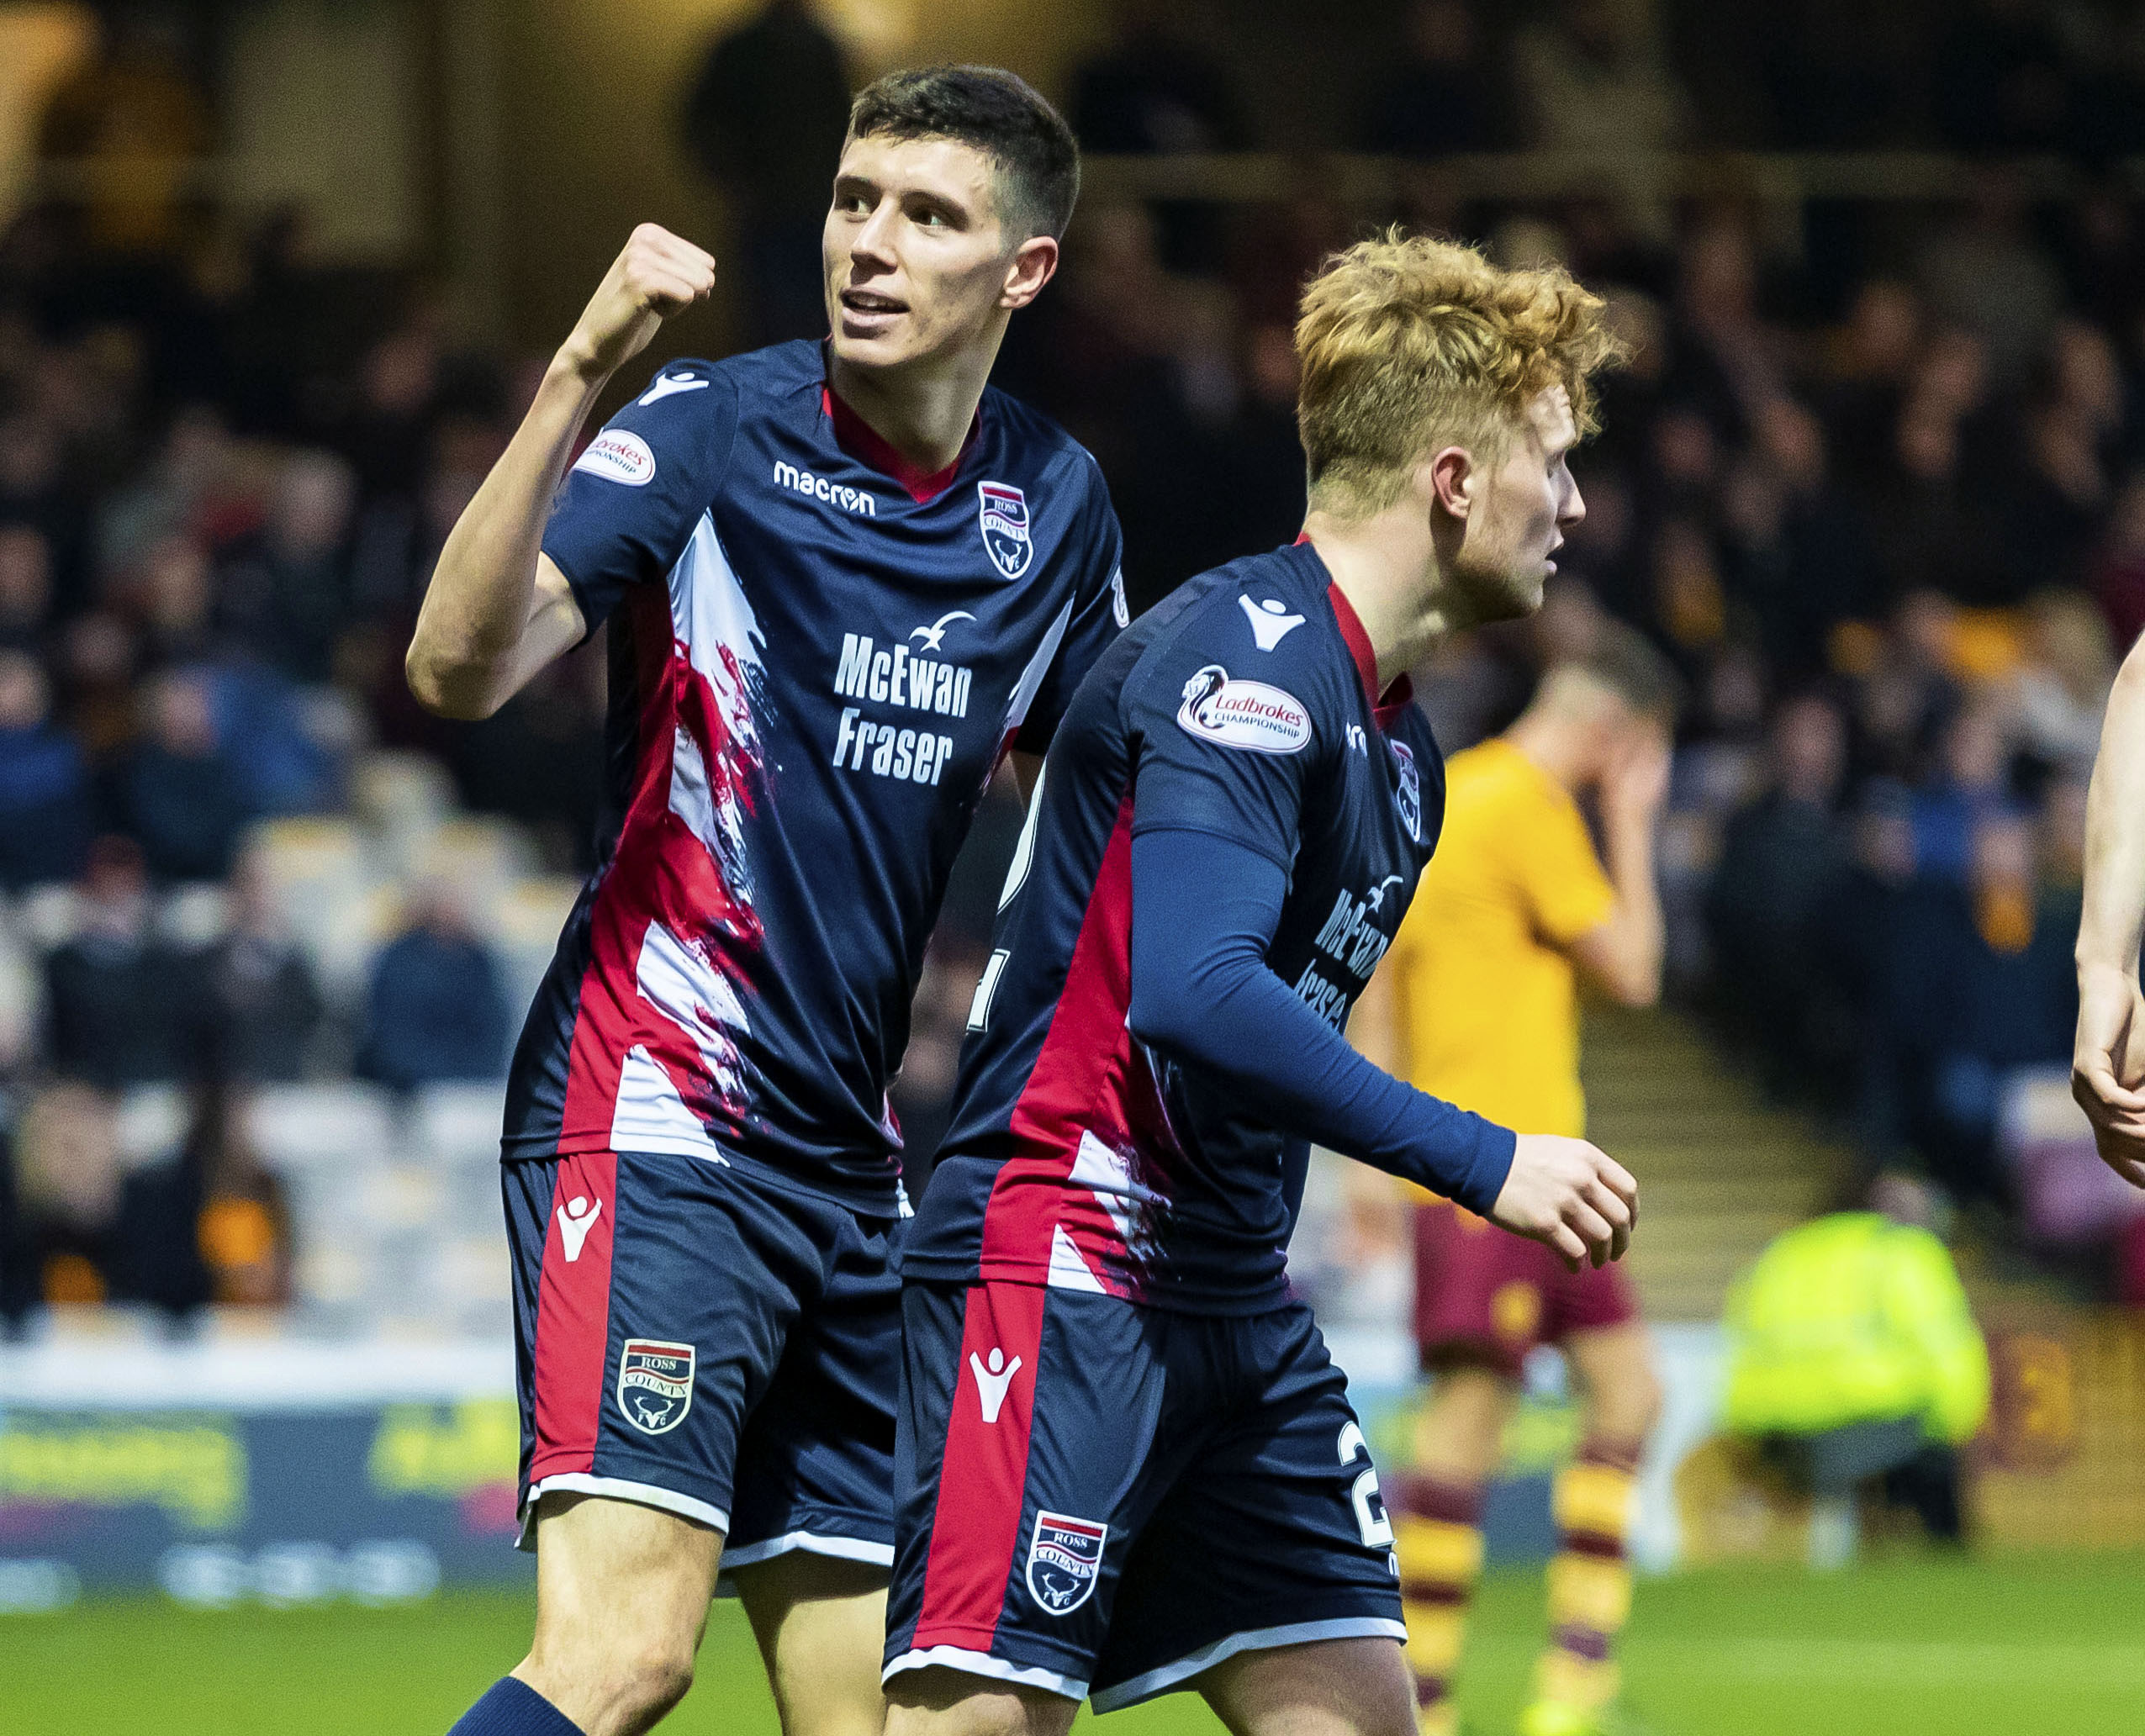 Ross Stewart netted twice in the IRN-BRU Cup quarter-final against Motherwell colts.